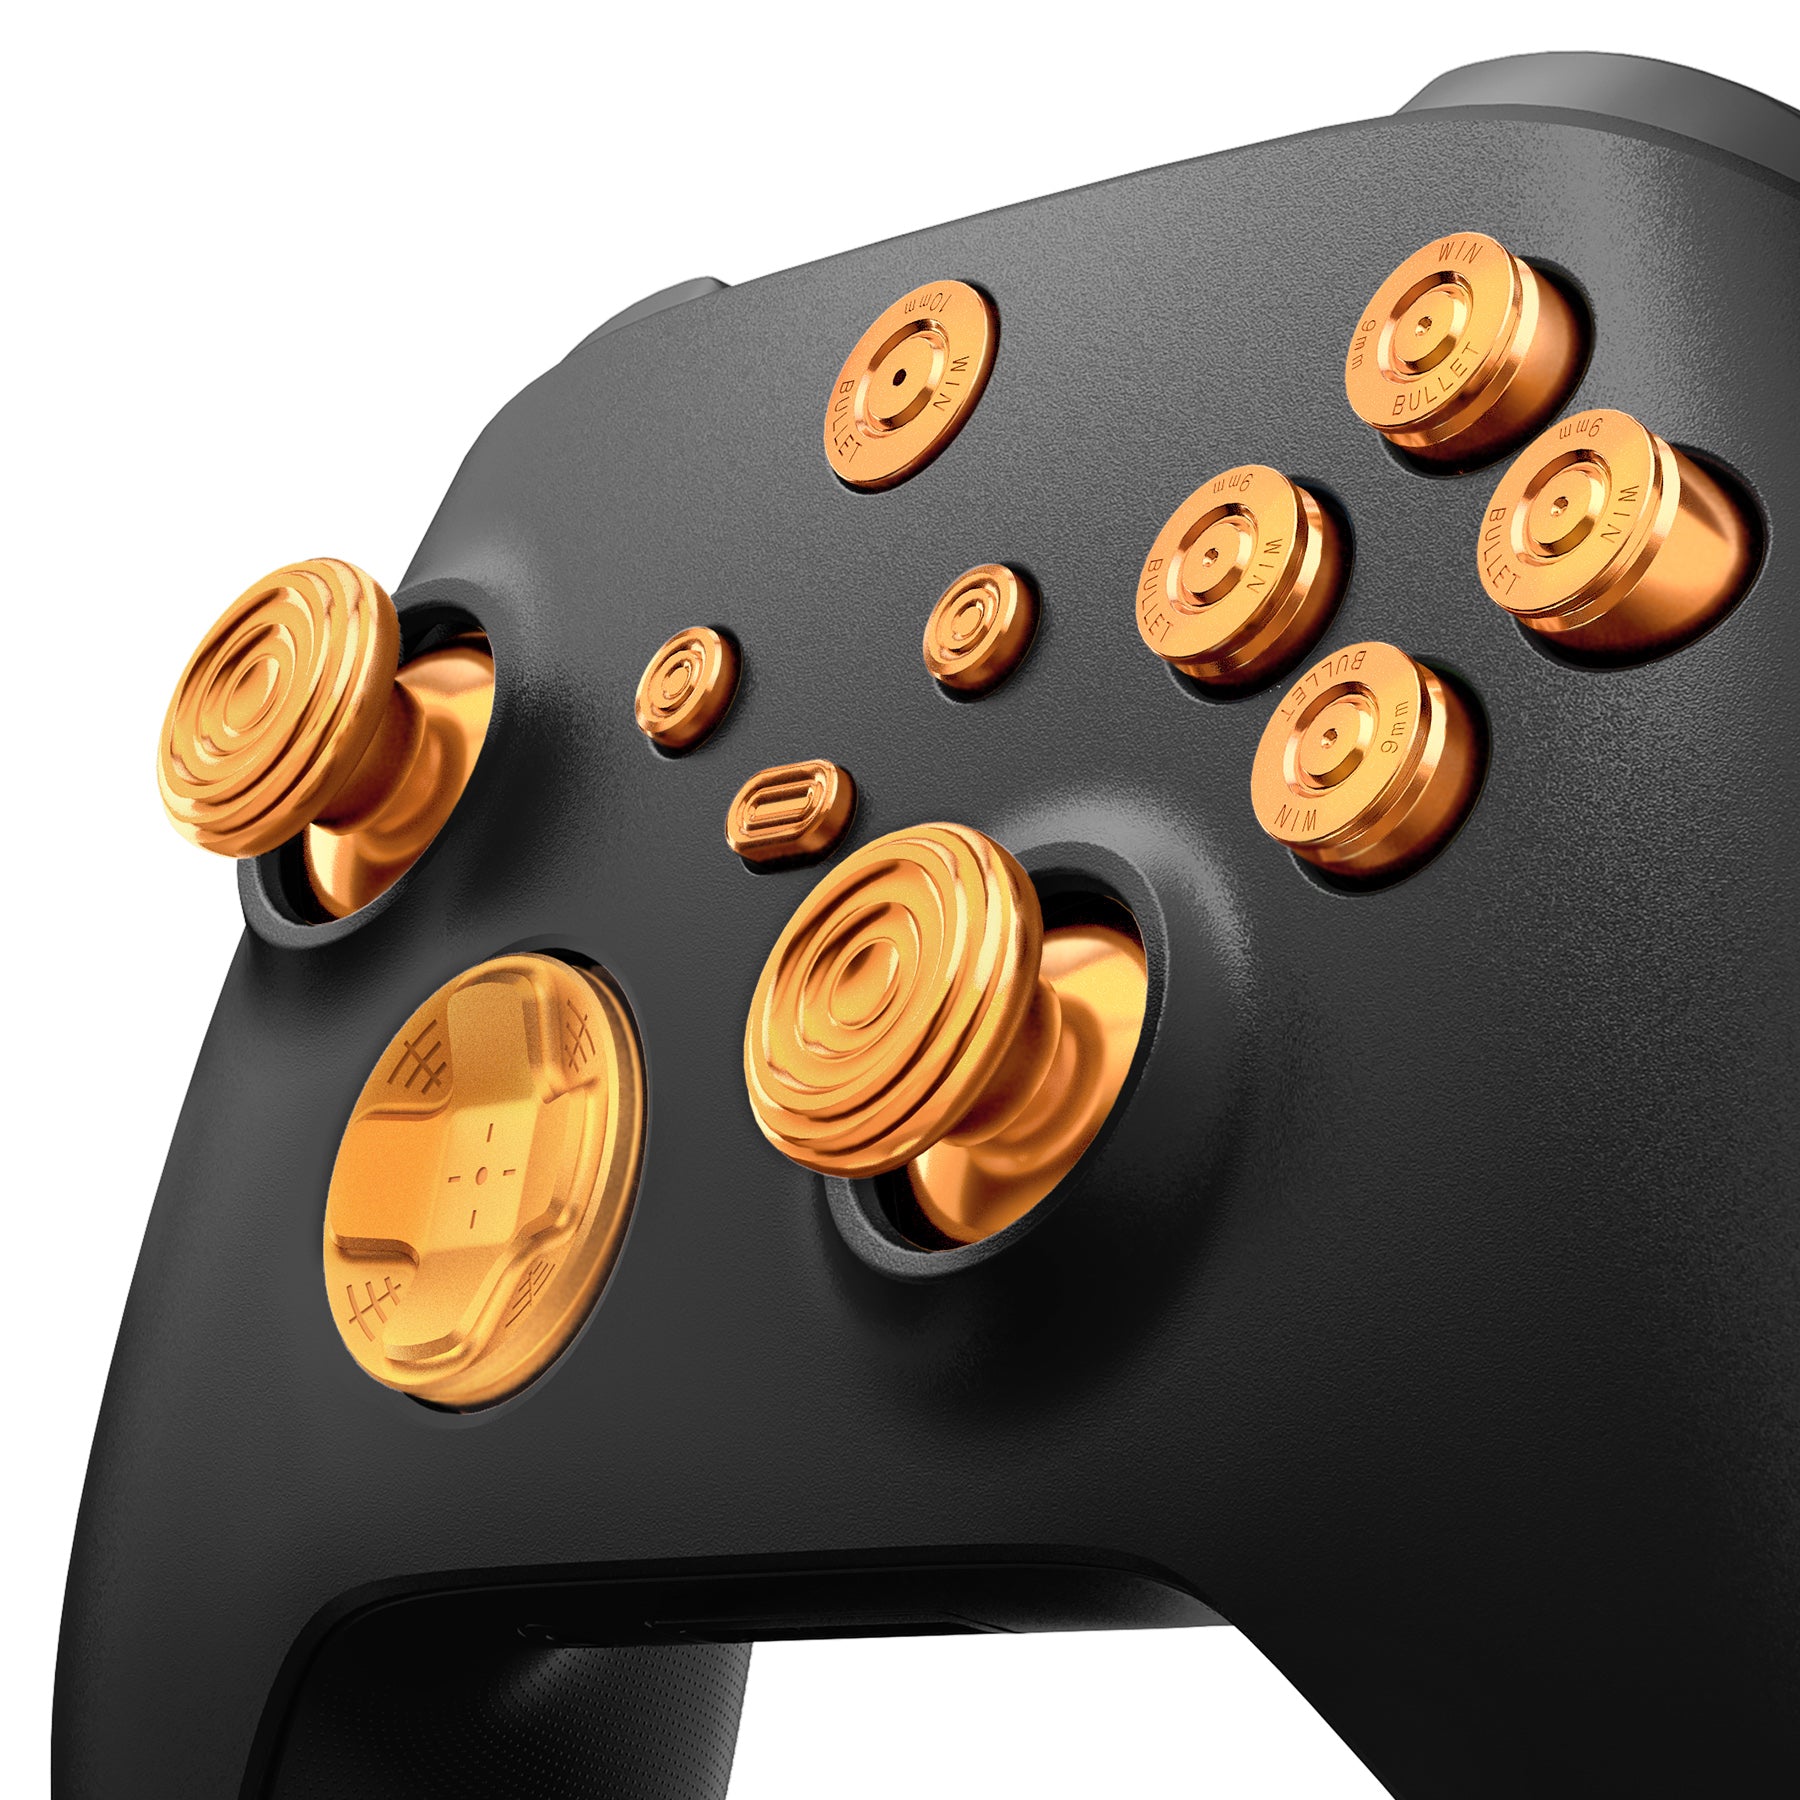 eXtremeRate Retail eXtremeRate 11 in 1 Custom Gold Metal Buttons for Xbox Series X/S Controller, Aluminum Alloy Dpad Start Back Share Button, Replacement Thumbsticks, Home ABXY Bullet Buttons for Xbox Core Controller - JX3E001